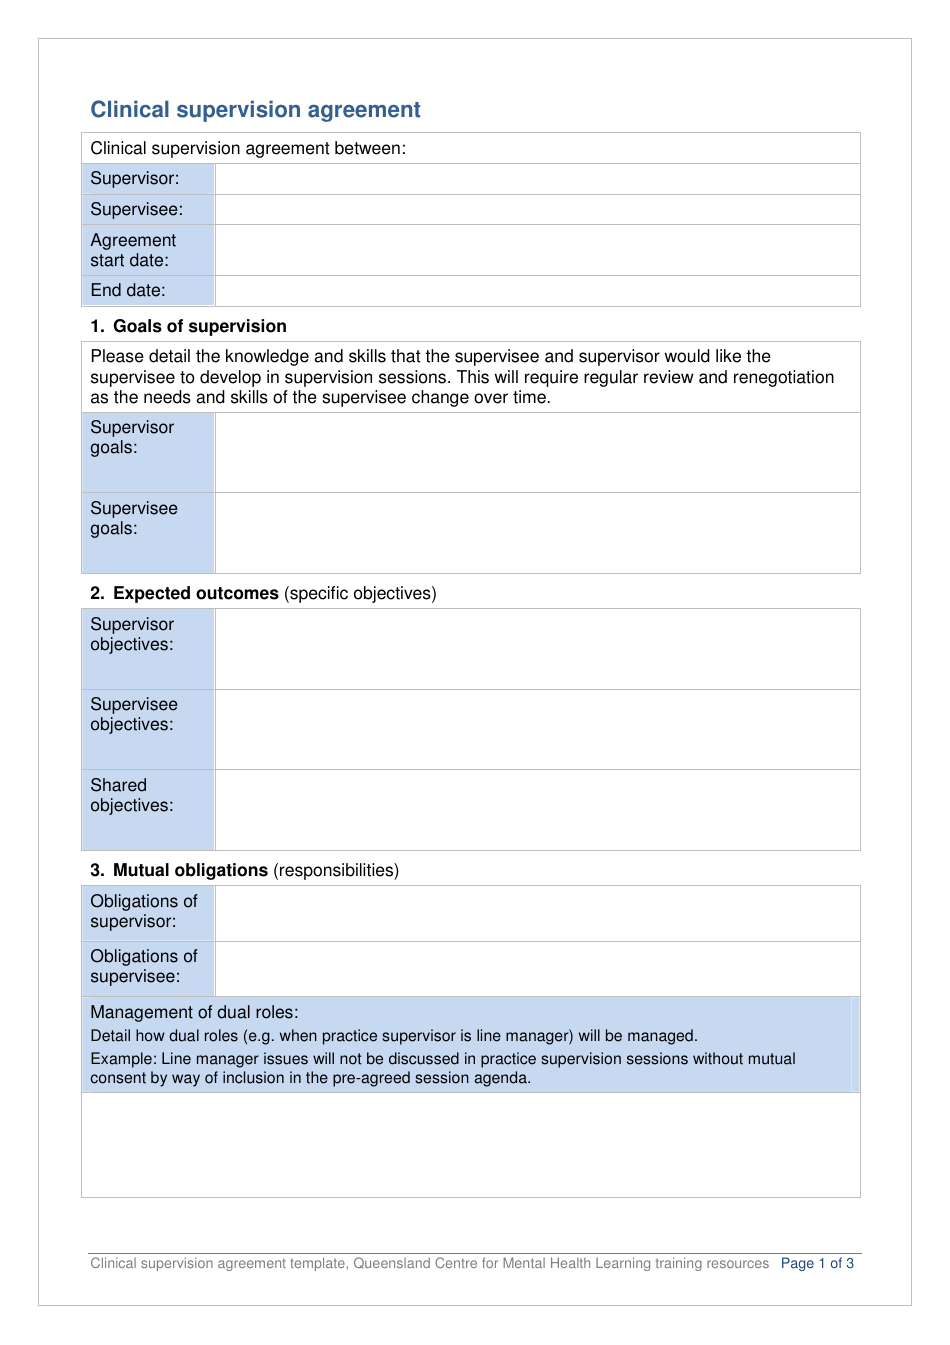 Clinical Supervision Agreement Form - Queensland Centre for Mental Health Learning - Queensland, Australia, Page 1